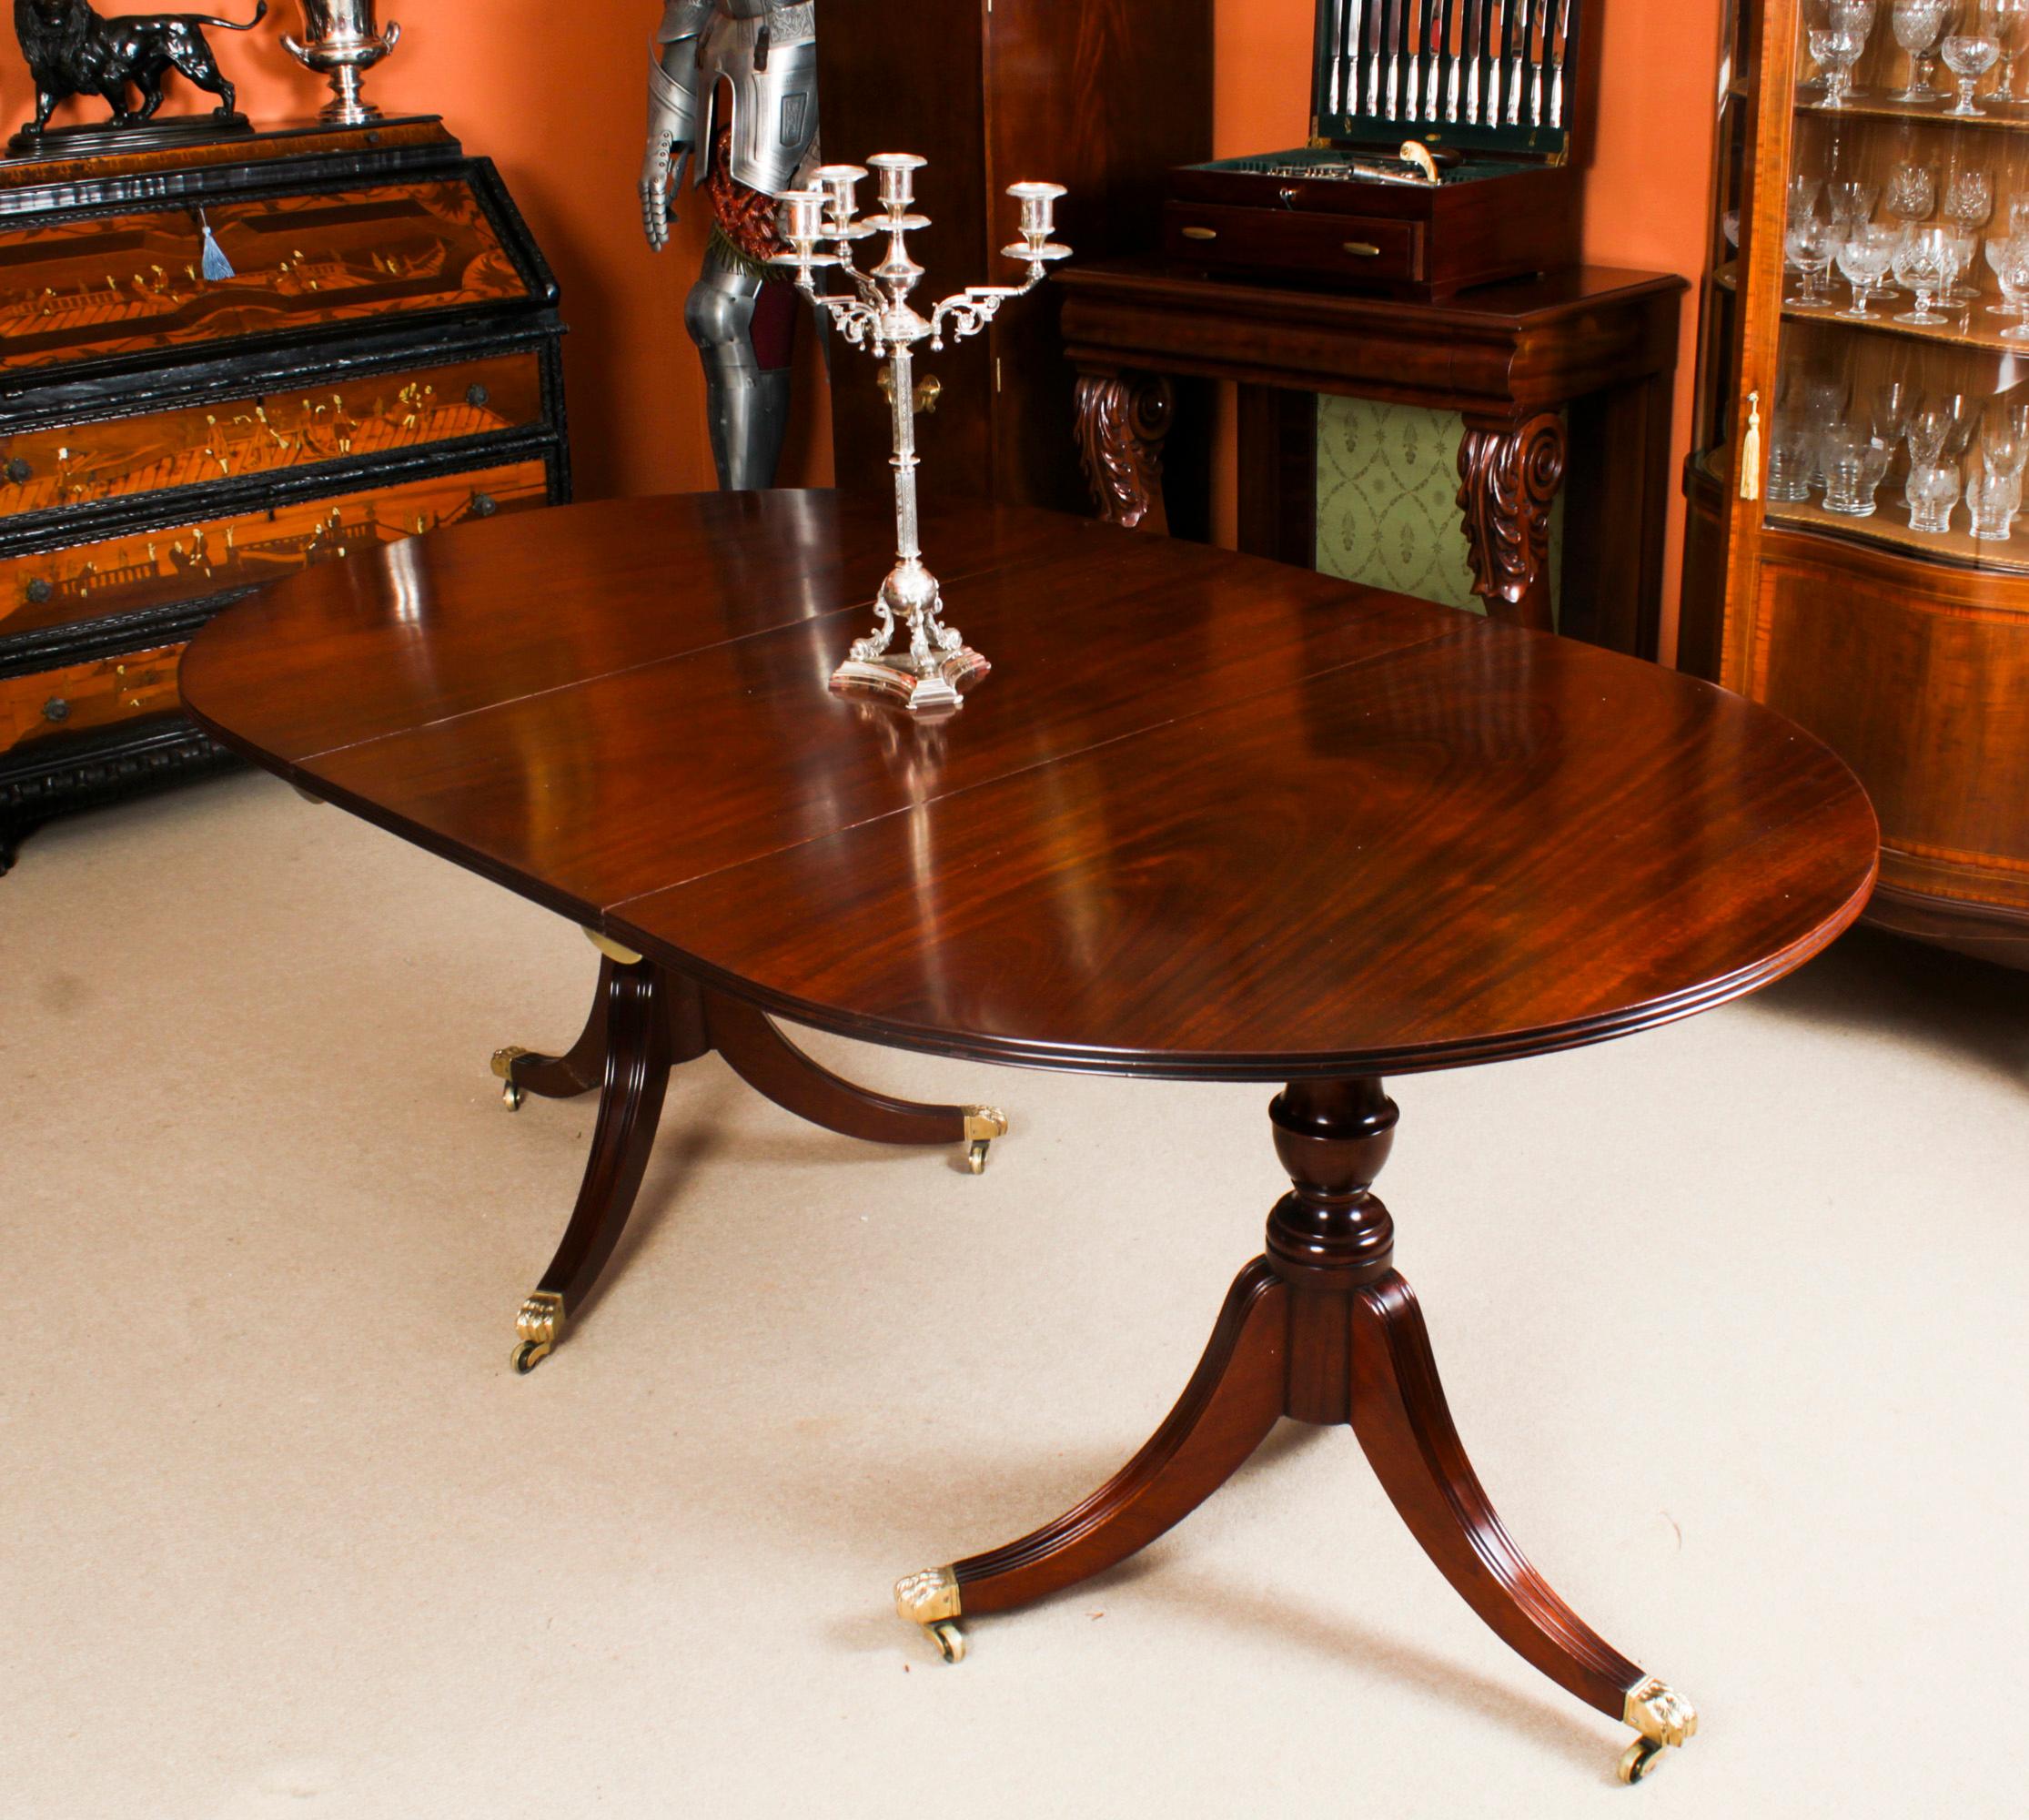 This is an elegant antique Regency dining table that can comfortably seat six people, Circa 1830 in date.
 
The table is of oval form with reeded edge. It is raised on twin urnular pillars with triple swept sabre leg bases which are fitted with